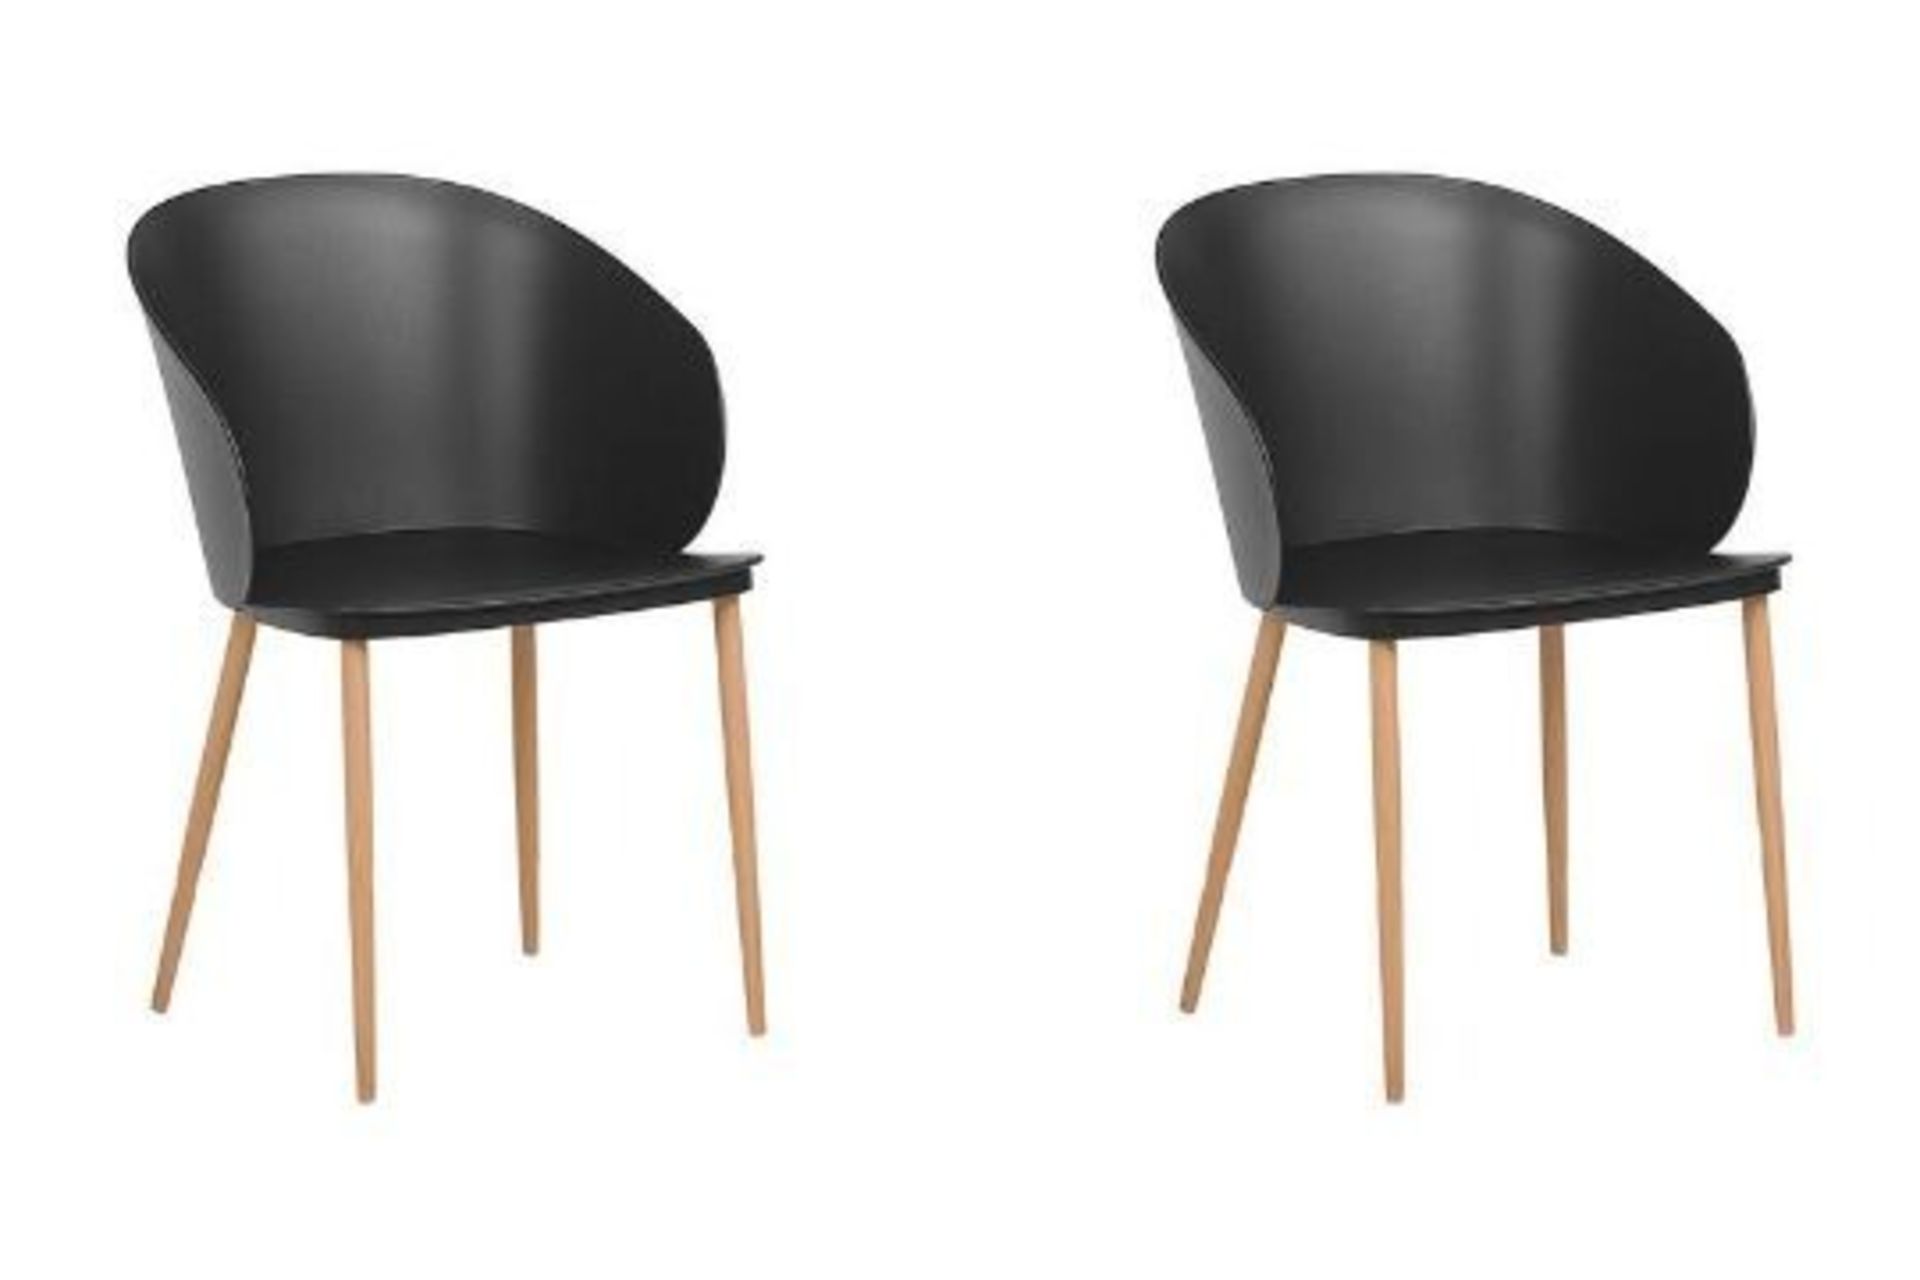 Blaykee Set of 2 Dining Chairs Black. - ER23. RRP £199.99